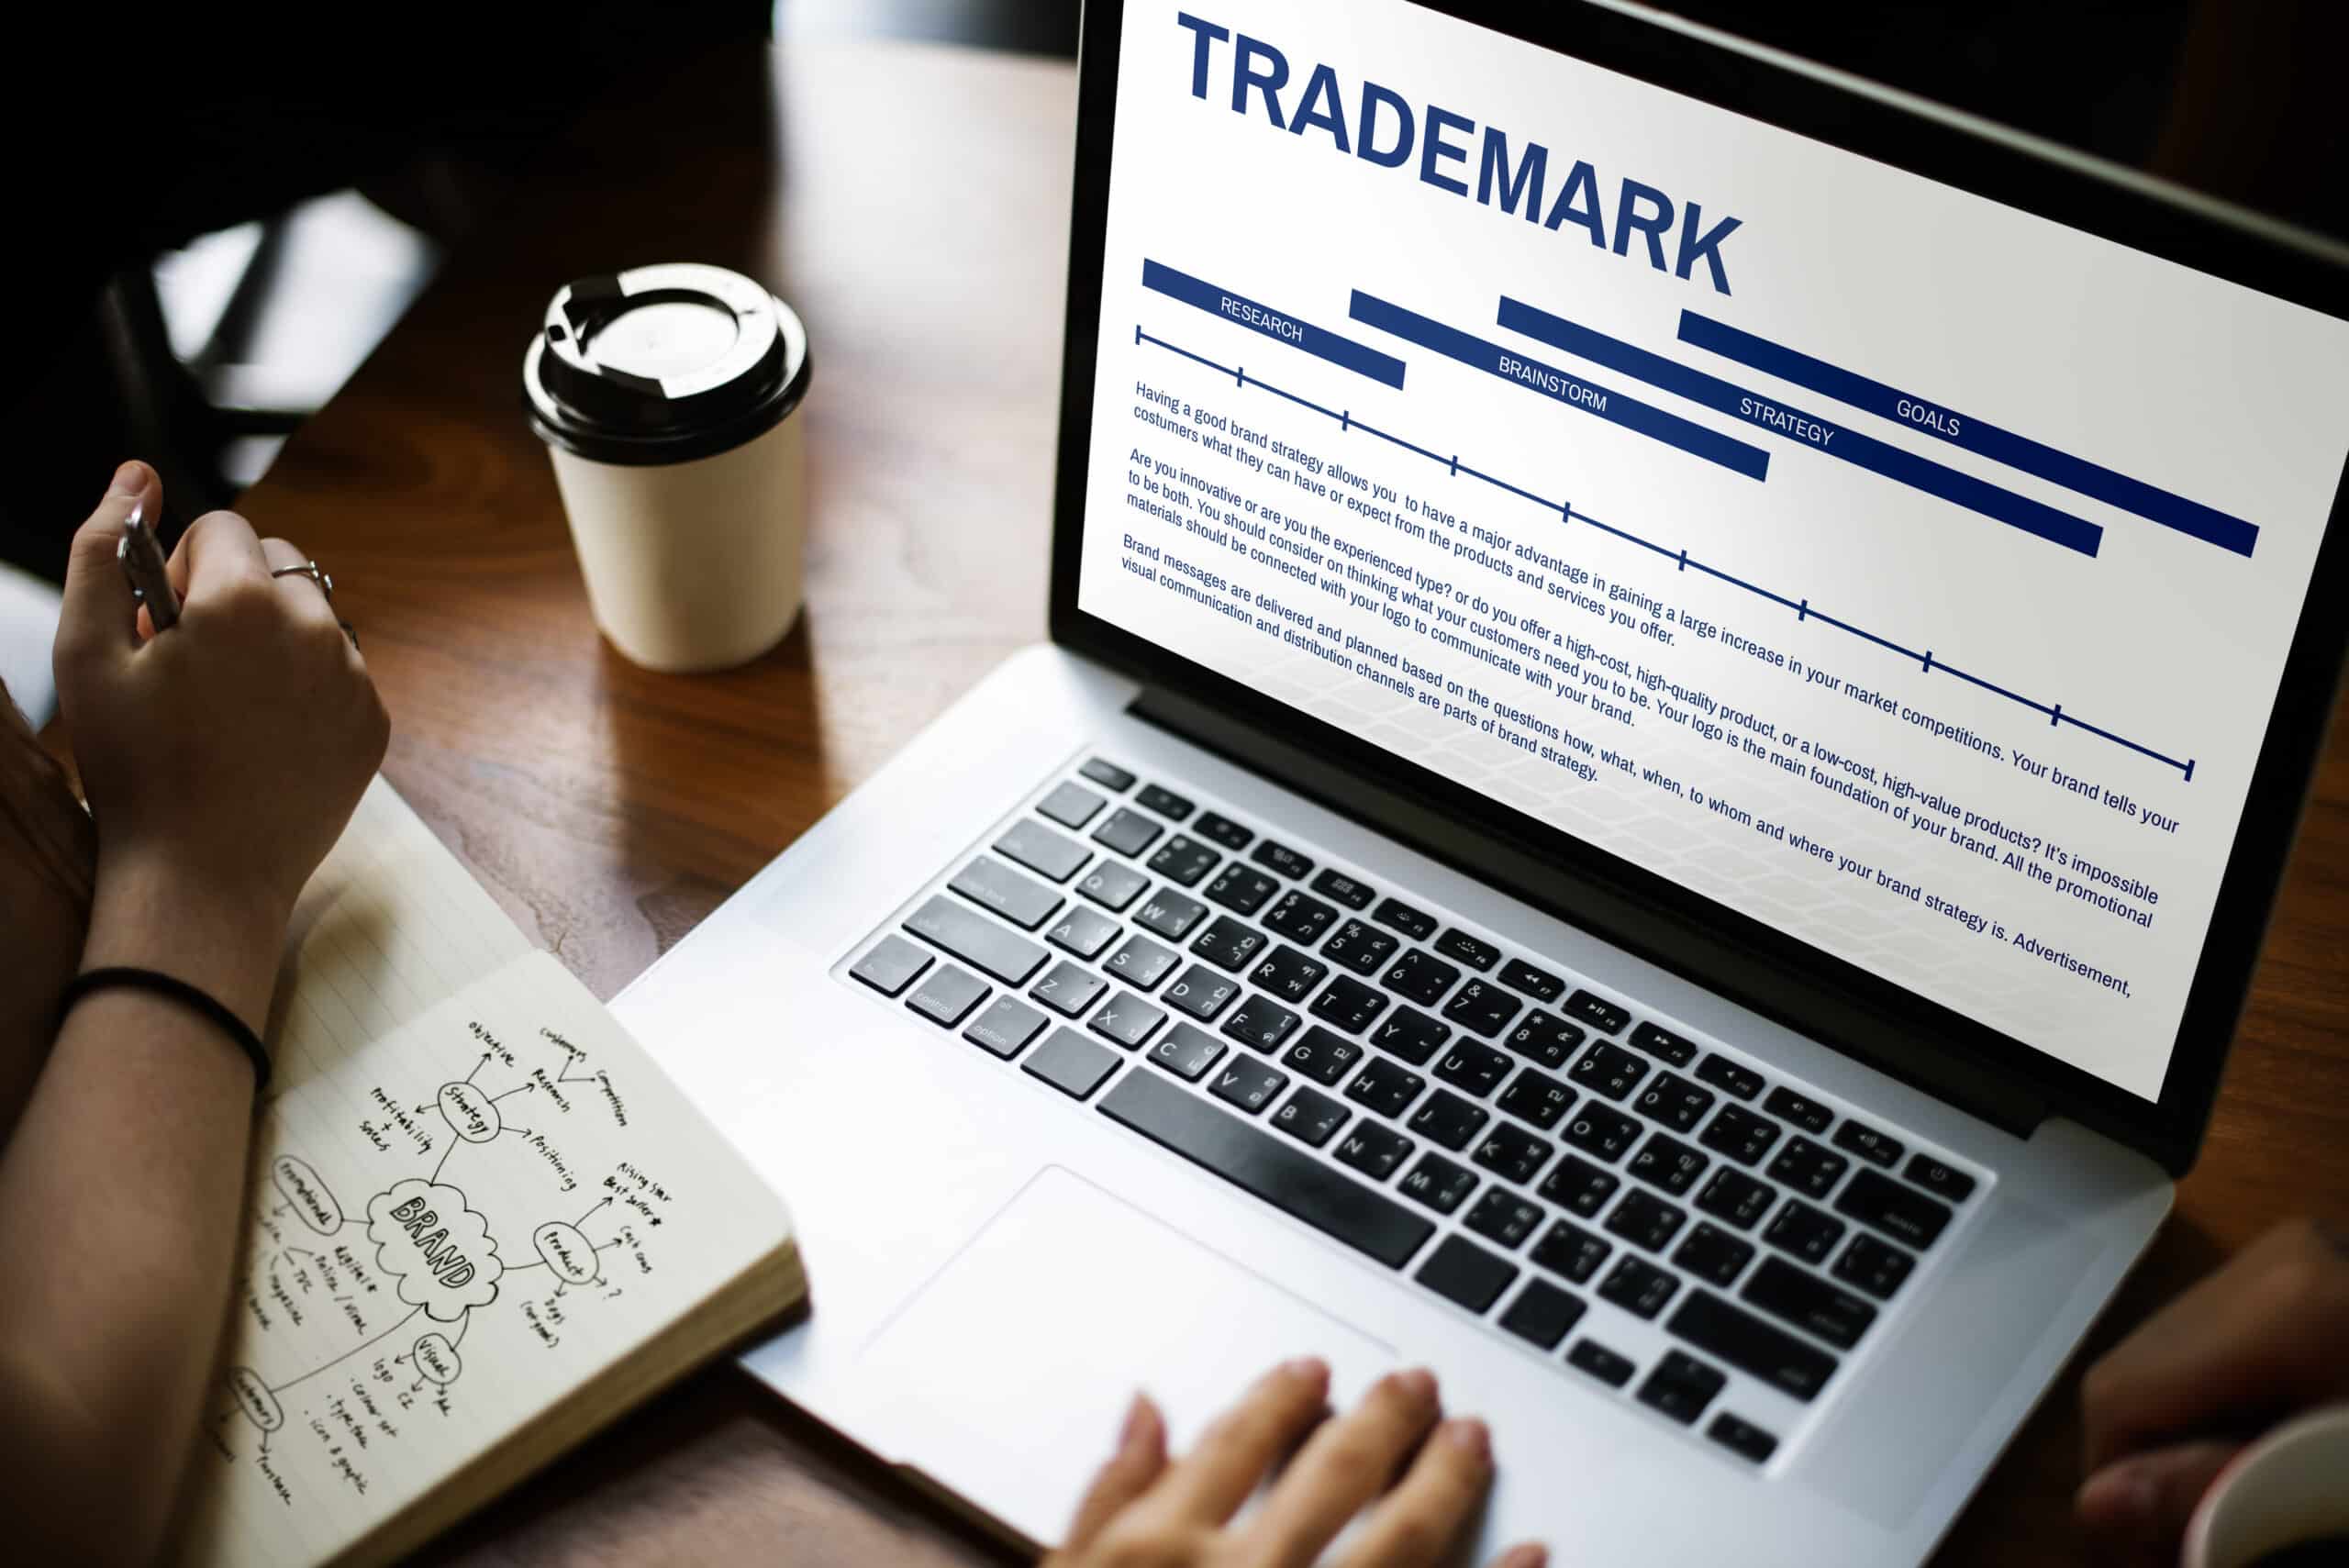 Canadian Patent and Trademark Fee Increase